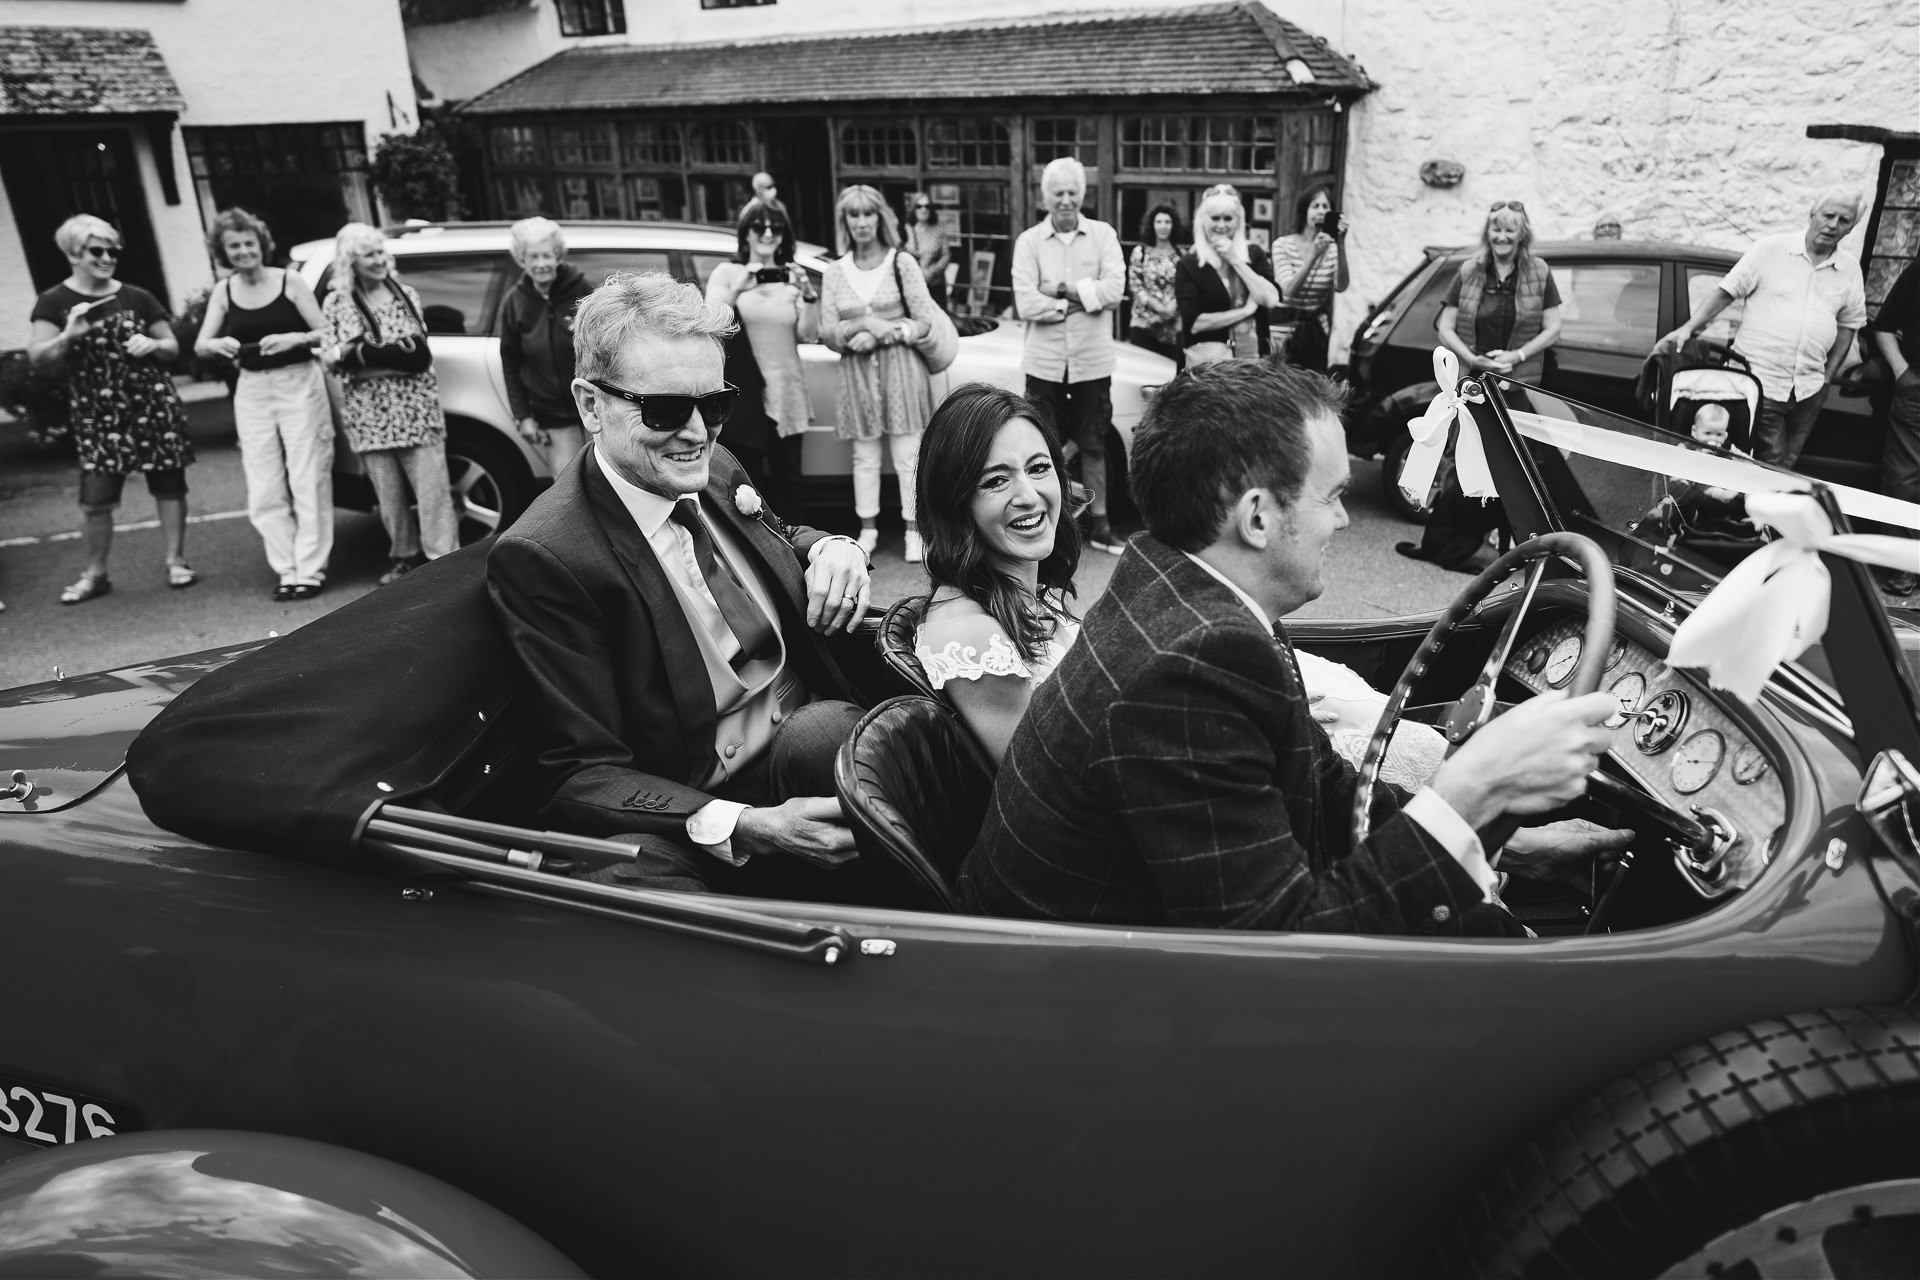 Bride and father arriving in a vintage car, with local villagers watching on the street